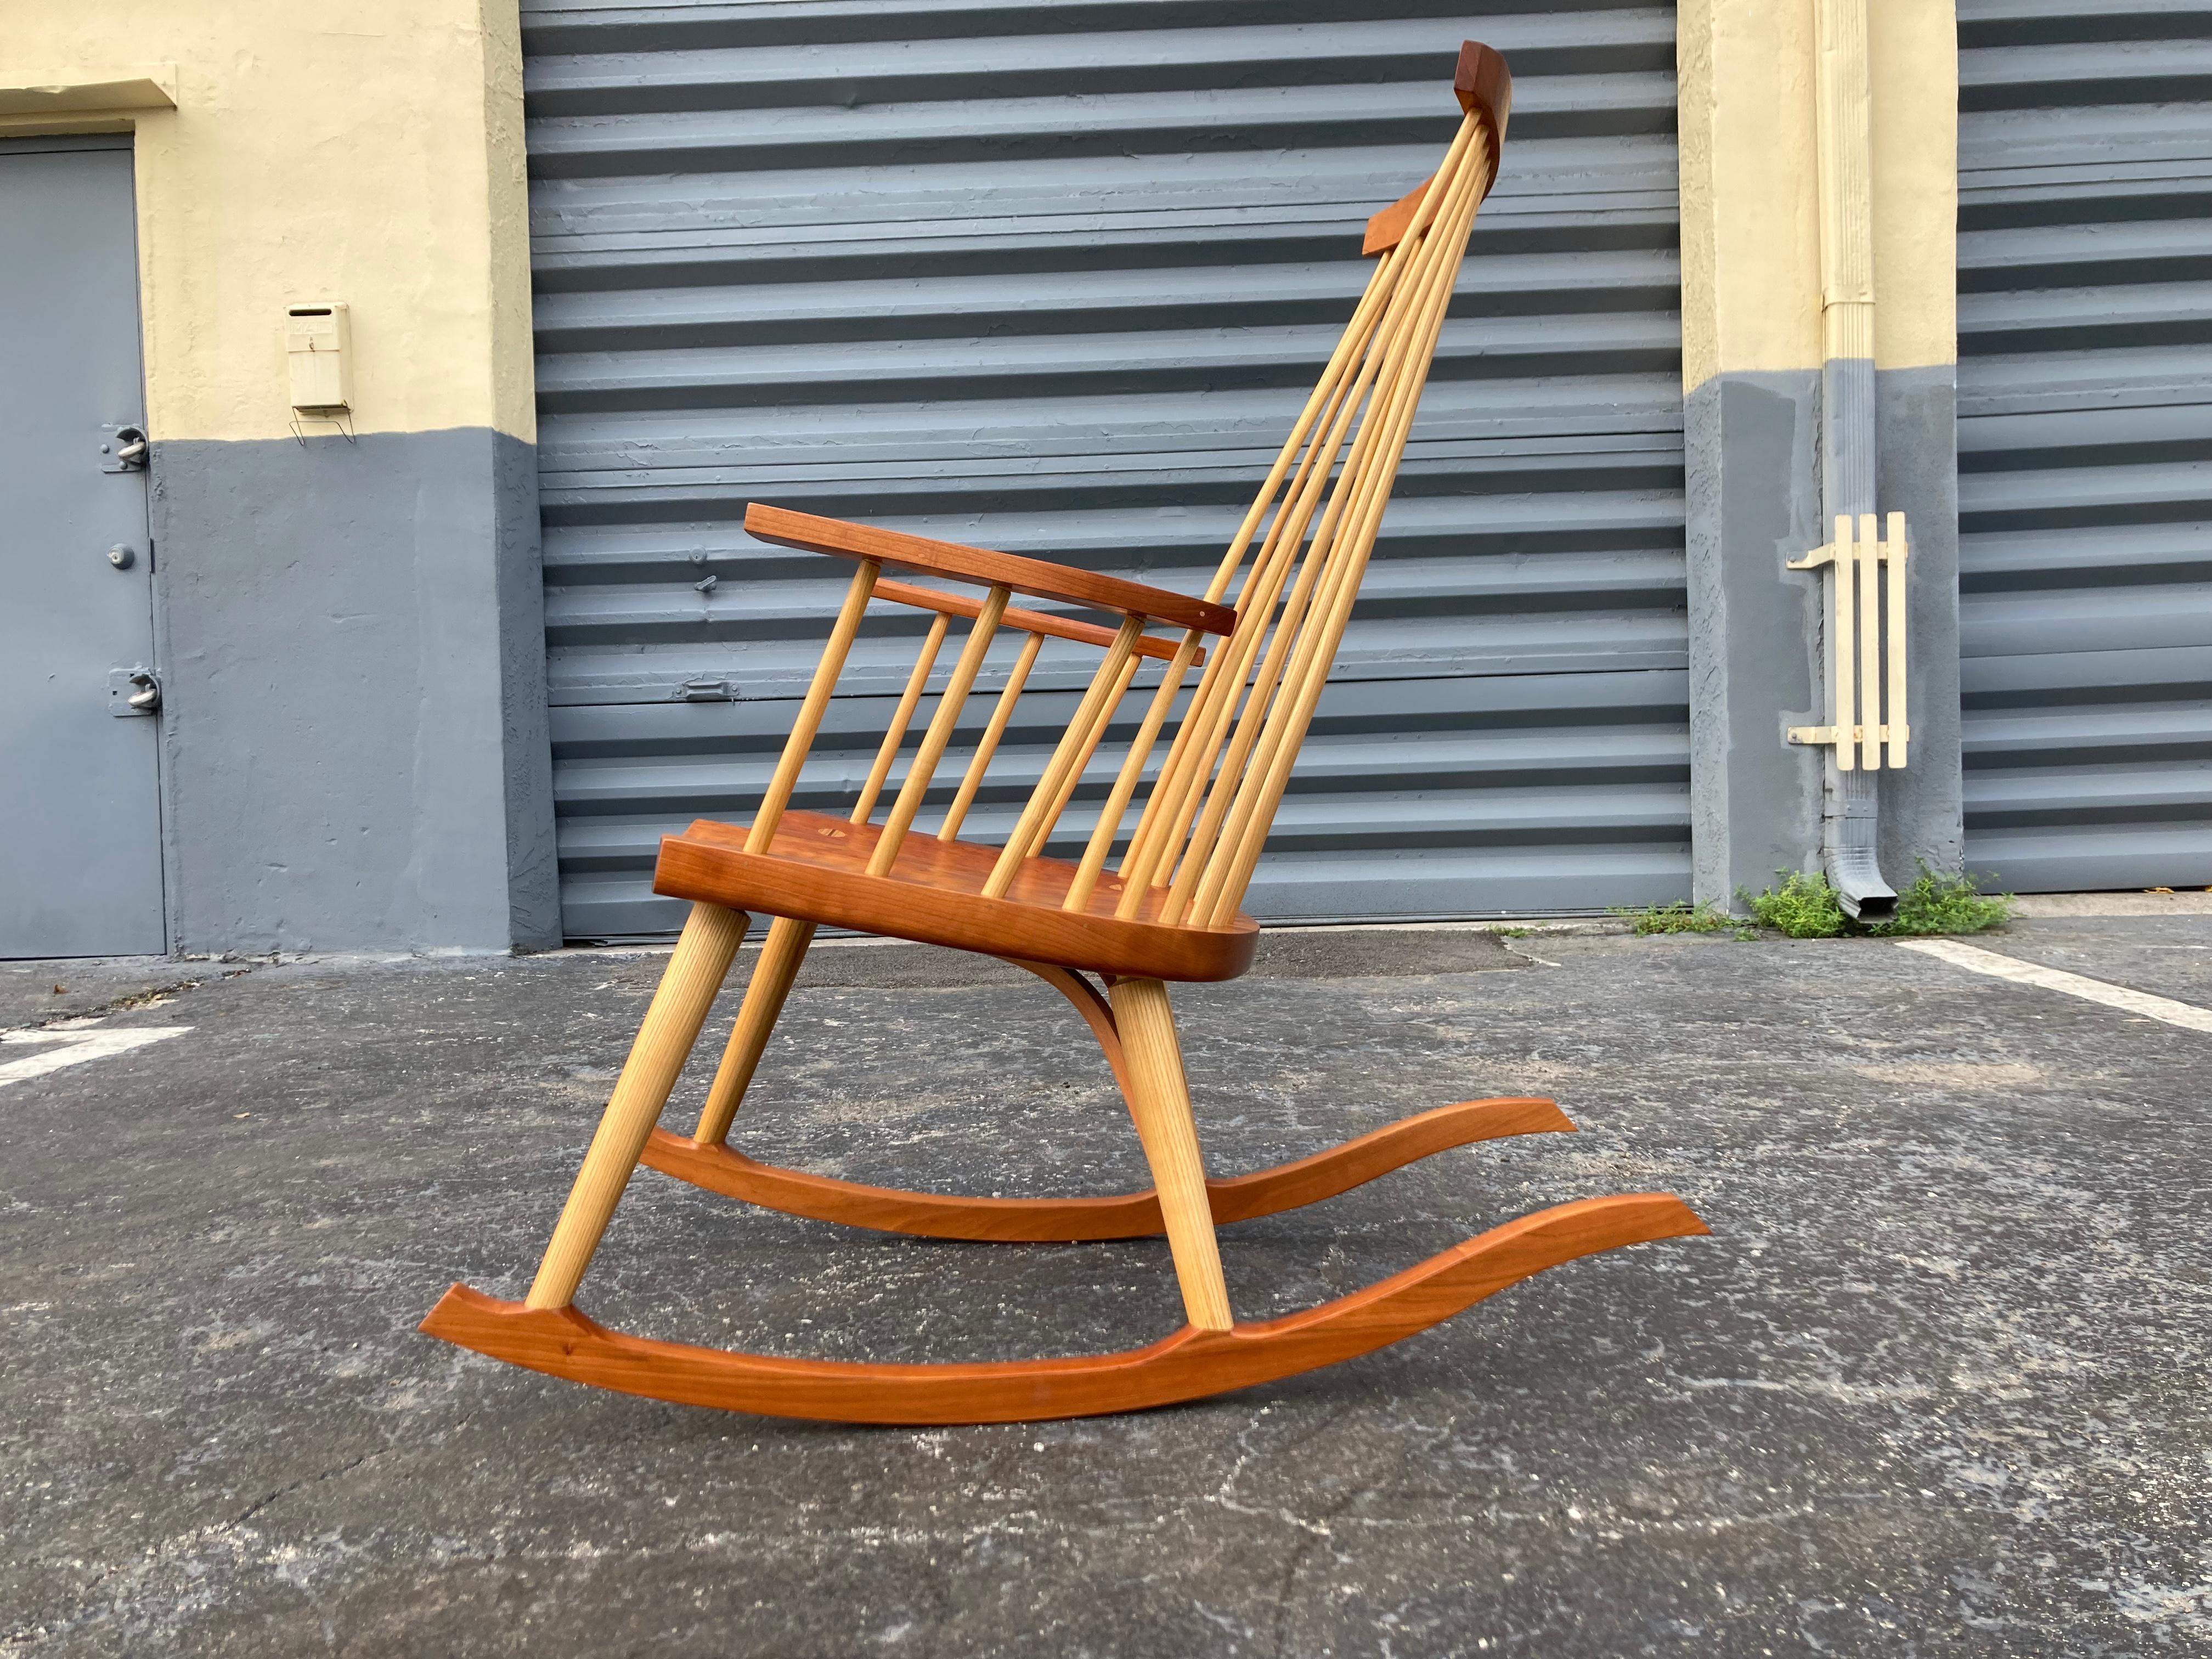 Handmade Moser Rocker from 2015 in Cherry. In good condition with some normal wear. Please see our other listings for more Moser furniture.